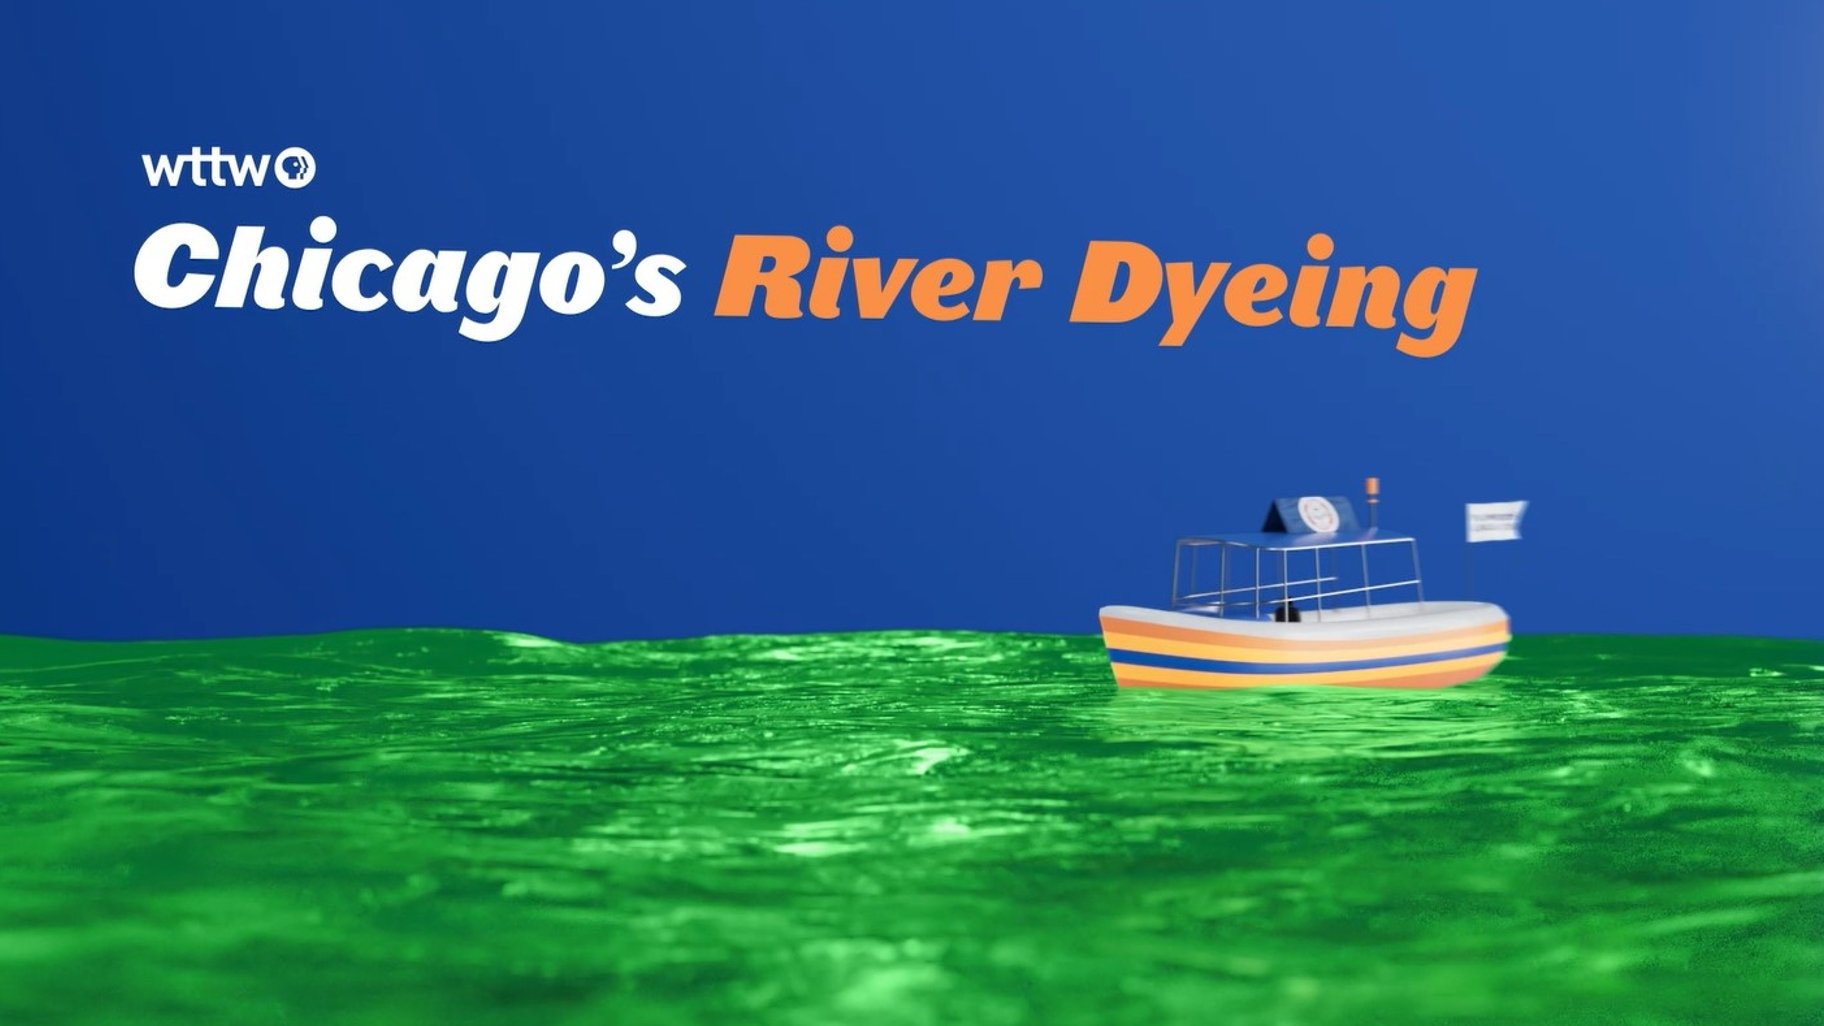 WTTW News Explains Why Does Chicago Dye the River Green for St